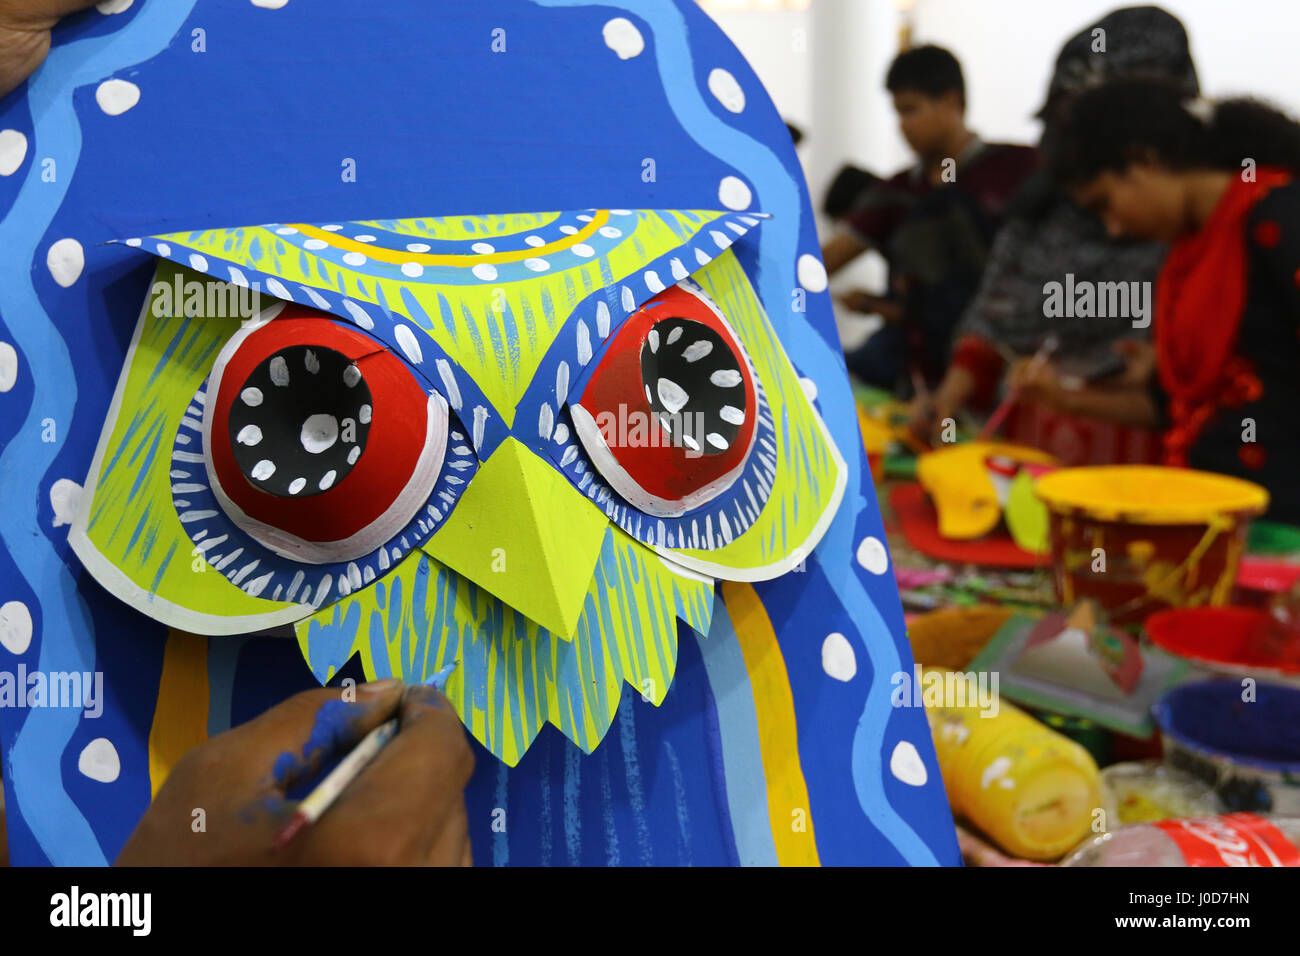 Dhaka, Bangladesh. 12th Apr, 2017. A student of the Art College paints a mask as part of the preparation of the Mangal Shobhajatra festival to celebrate Pahela Baishakh, the first day of the first month of Bangla calendar year 1425, in Dhaka, Bangladesh 12 April 2017. The day will be celebrated on 14 April while the UNESCO added the Mangal Shobhajatra festival on Pahela Baishakh among other new items to the safeguarding intangible cultural heritage list. Stock Photo